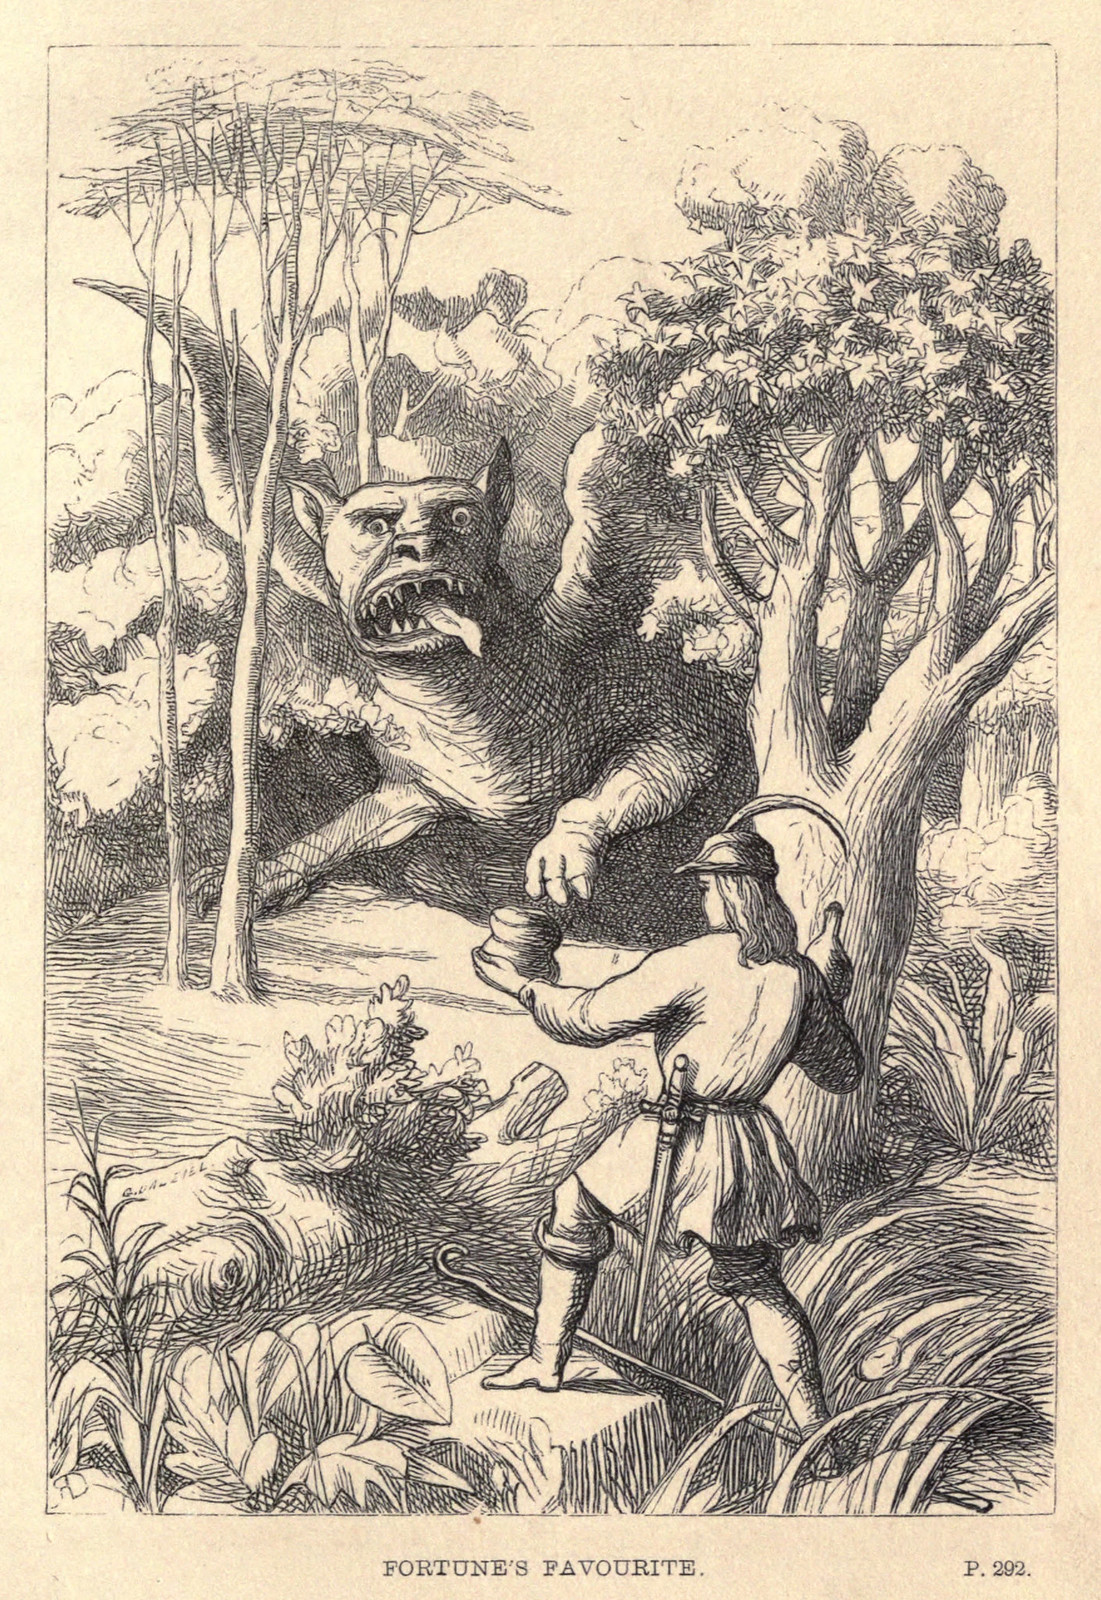 Richard Doyle - ‘Fortune’s Favourite’,  from “Fairy Tales From All Nations” by Anthony Reubens Montalba, 1849